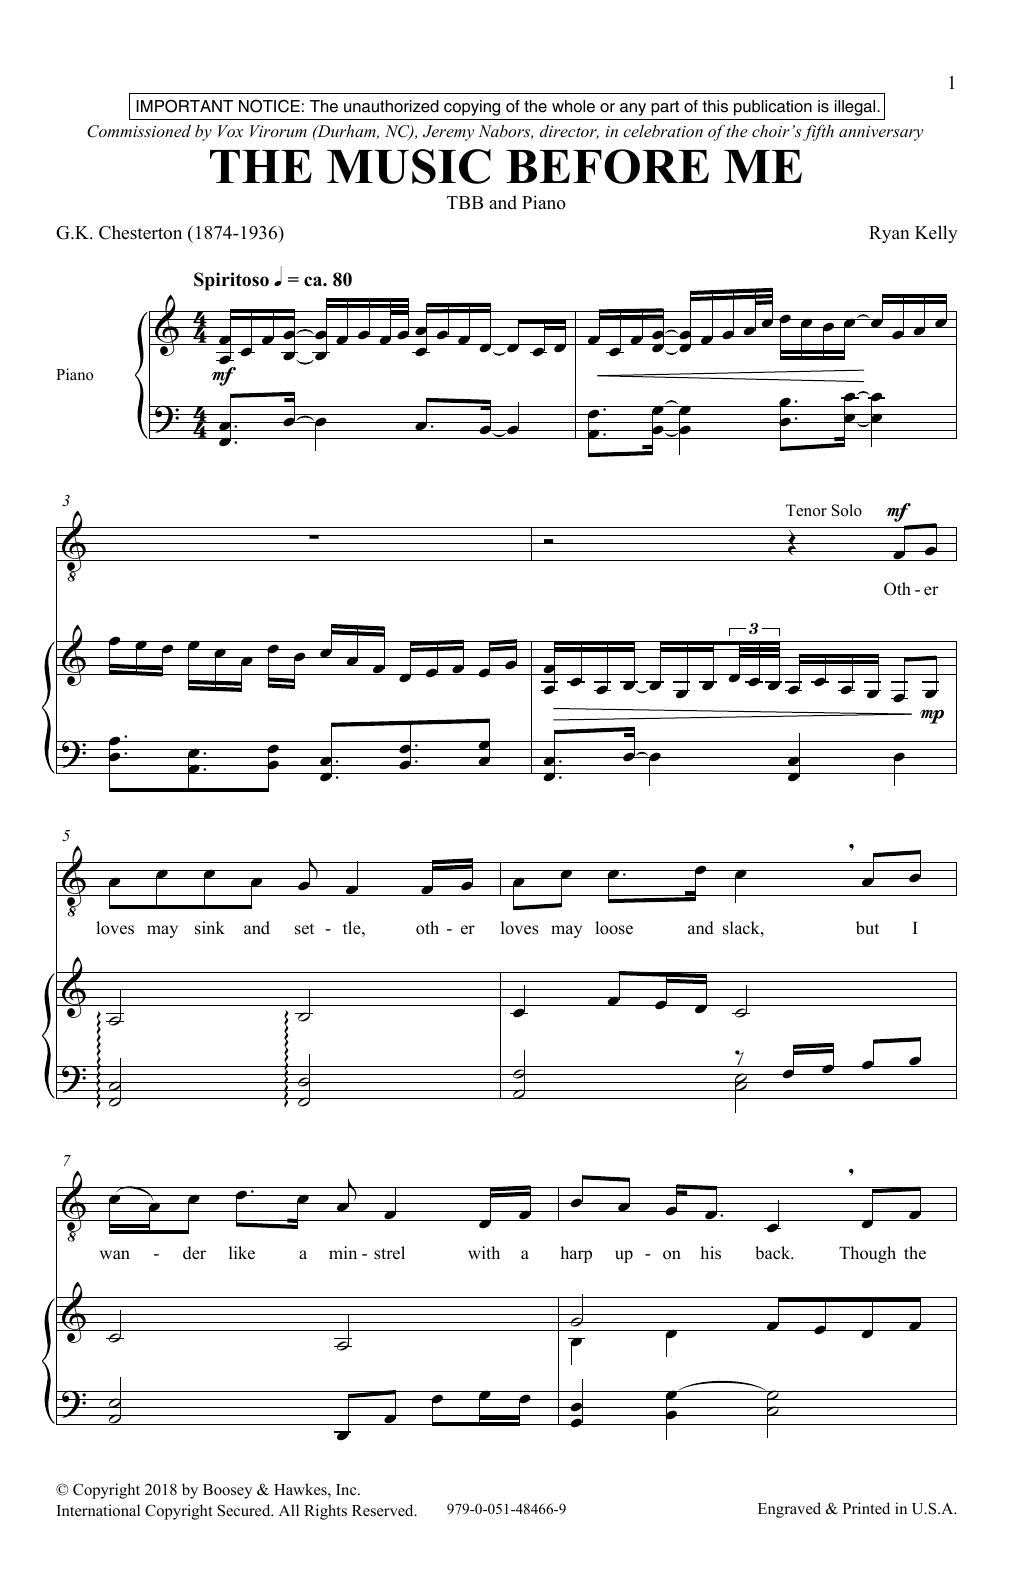 Download Ryan Kelly The Music Before Me Sheet Music